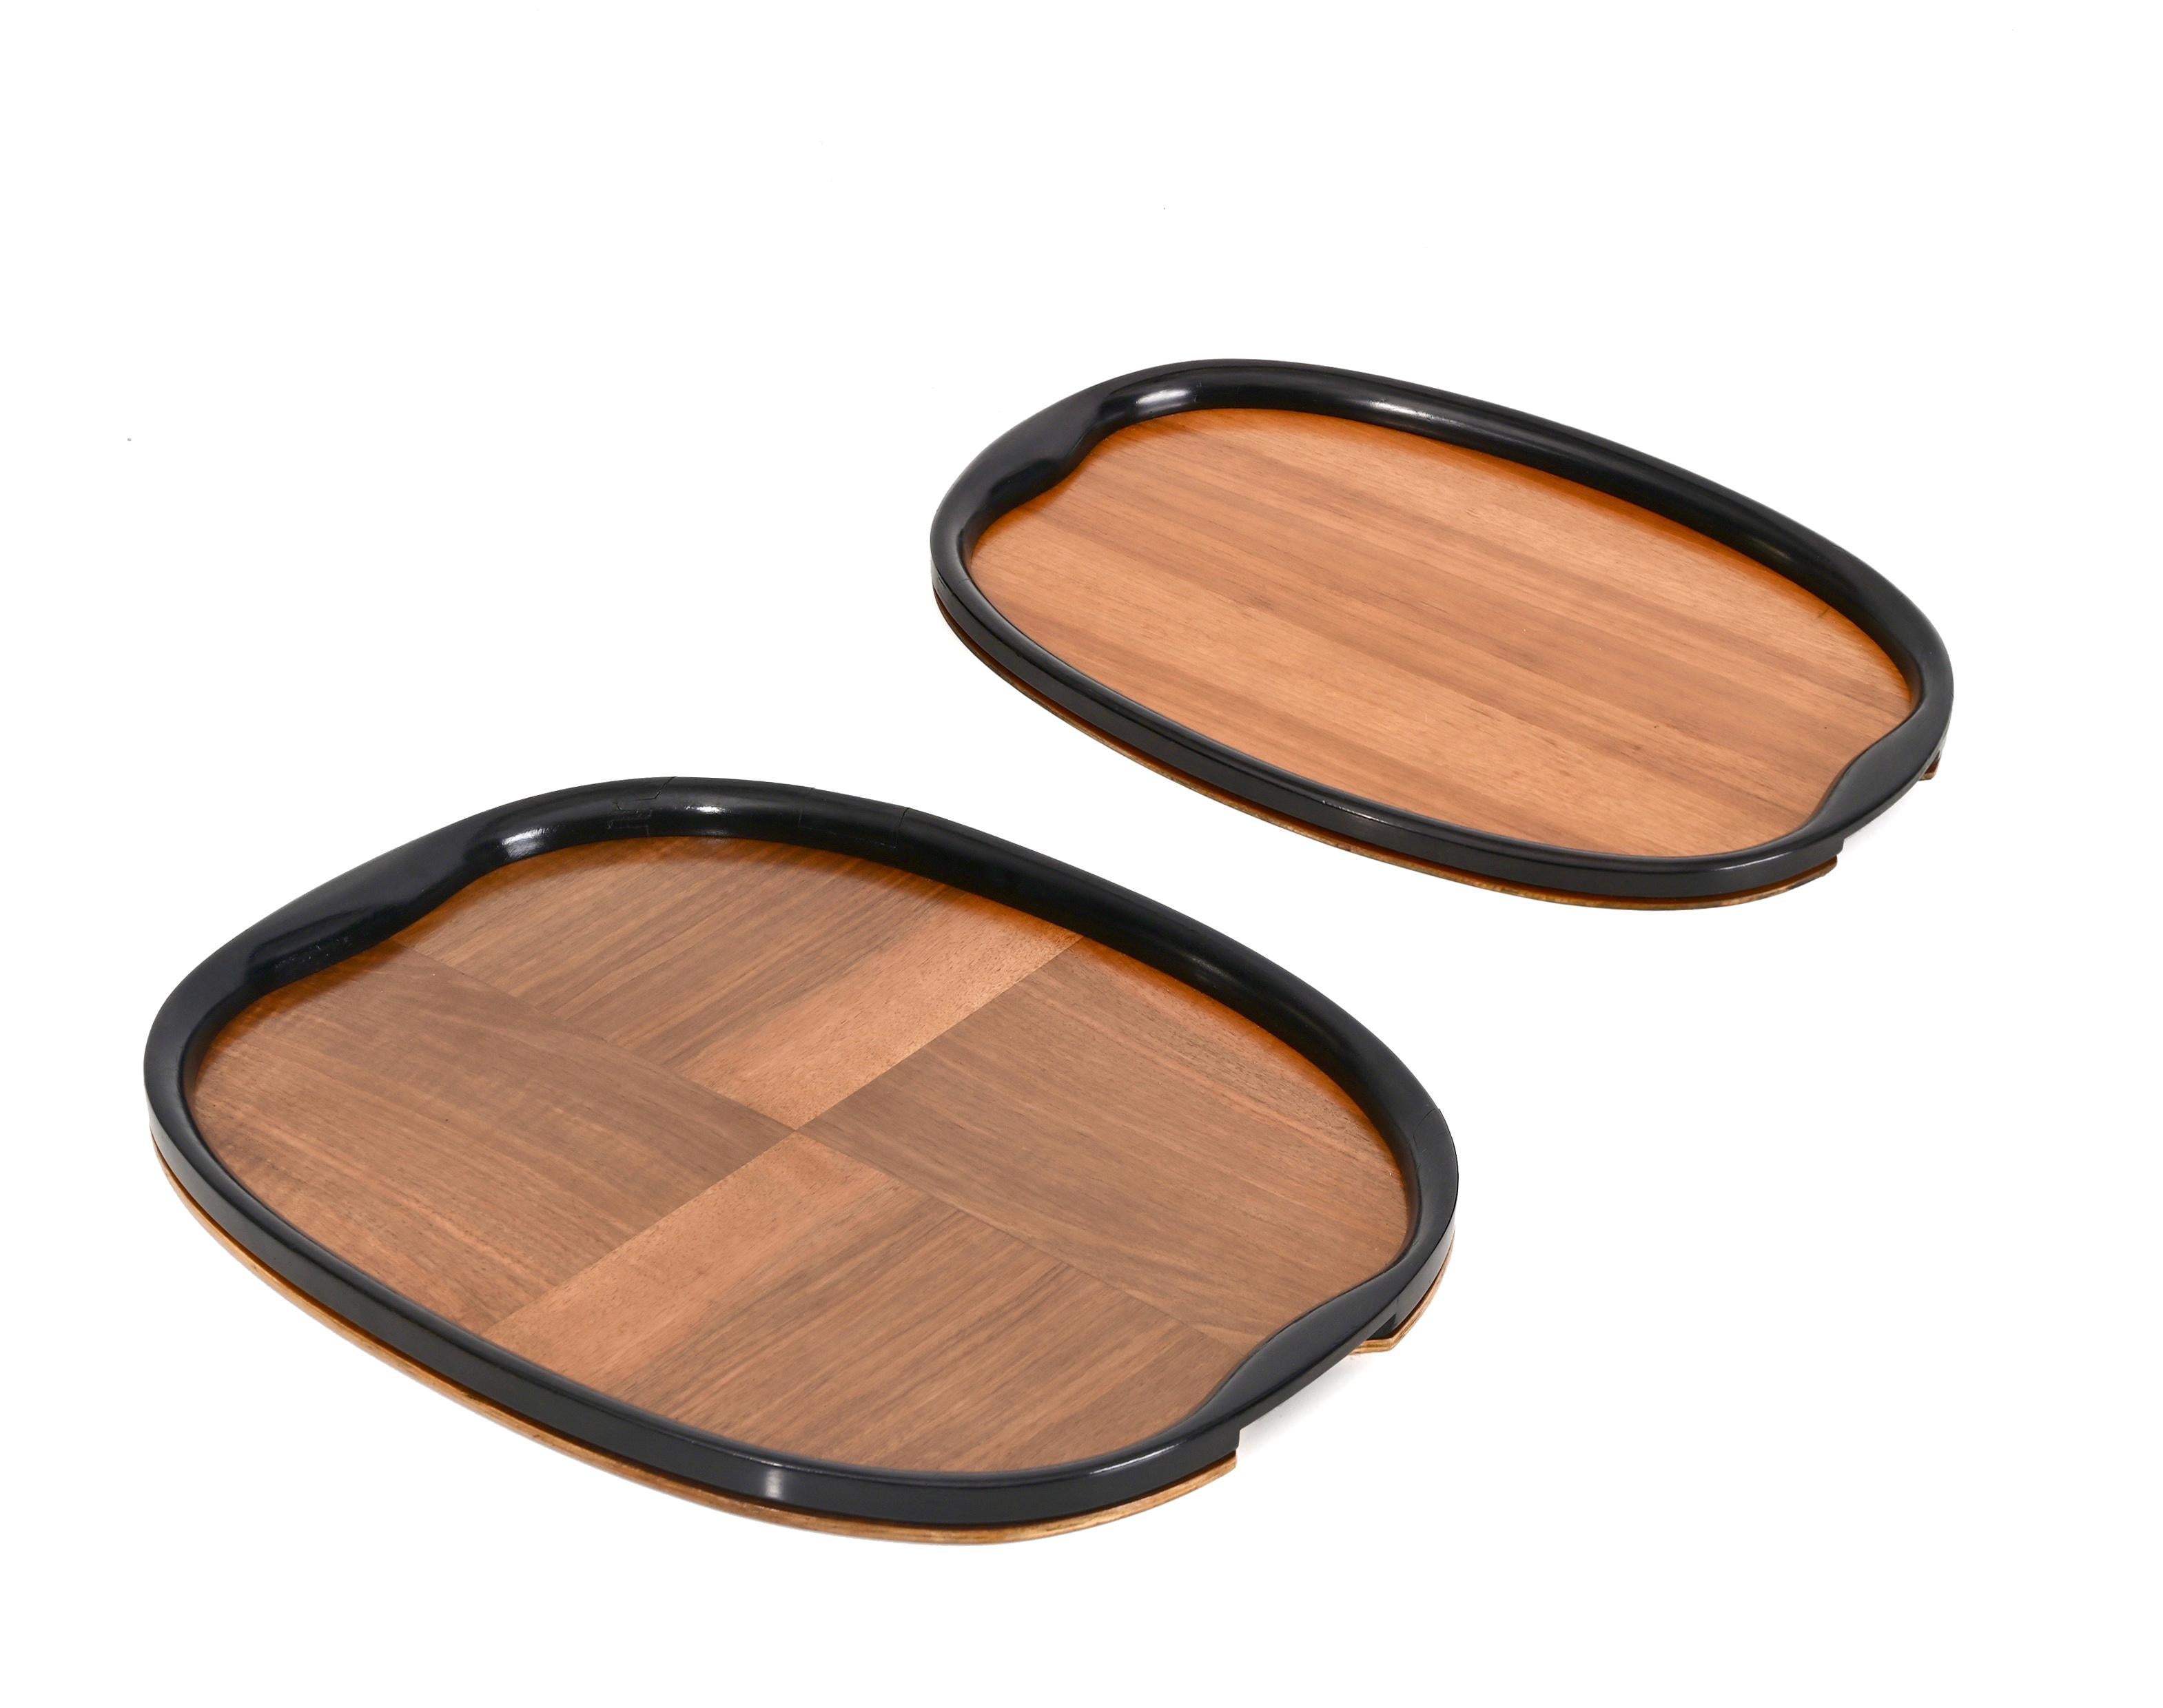 Pair of Art Deco Serving Trays, Ebonized Wood and Walnut, Italy, 1940s For Sale 13